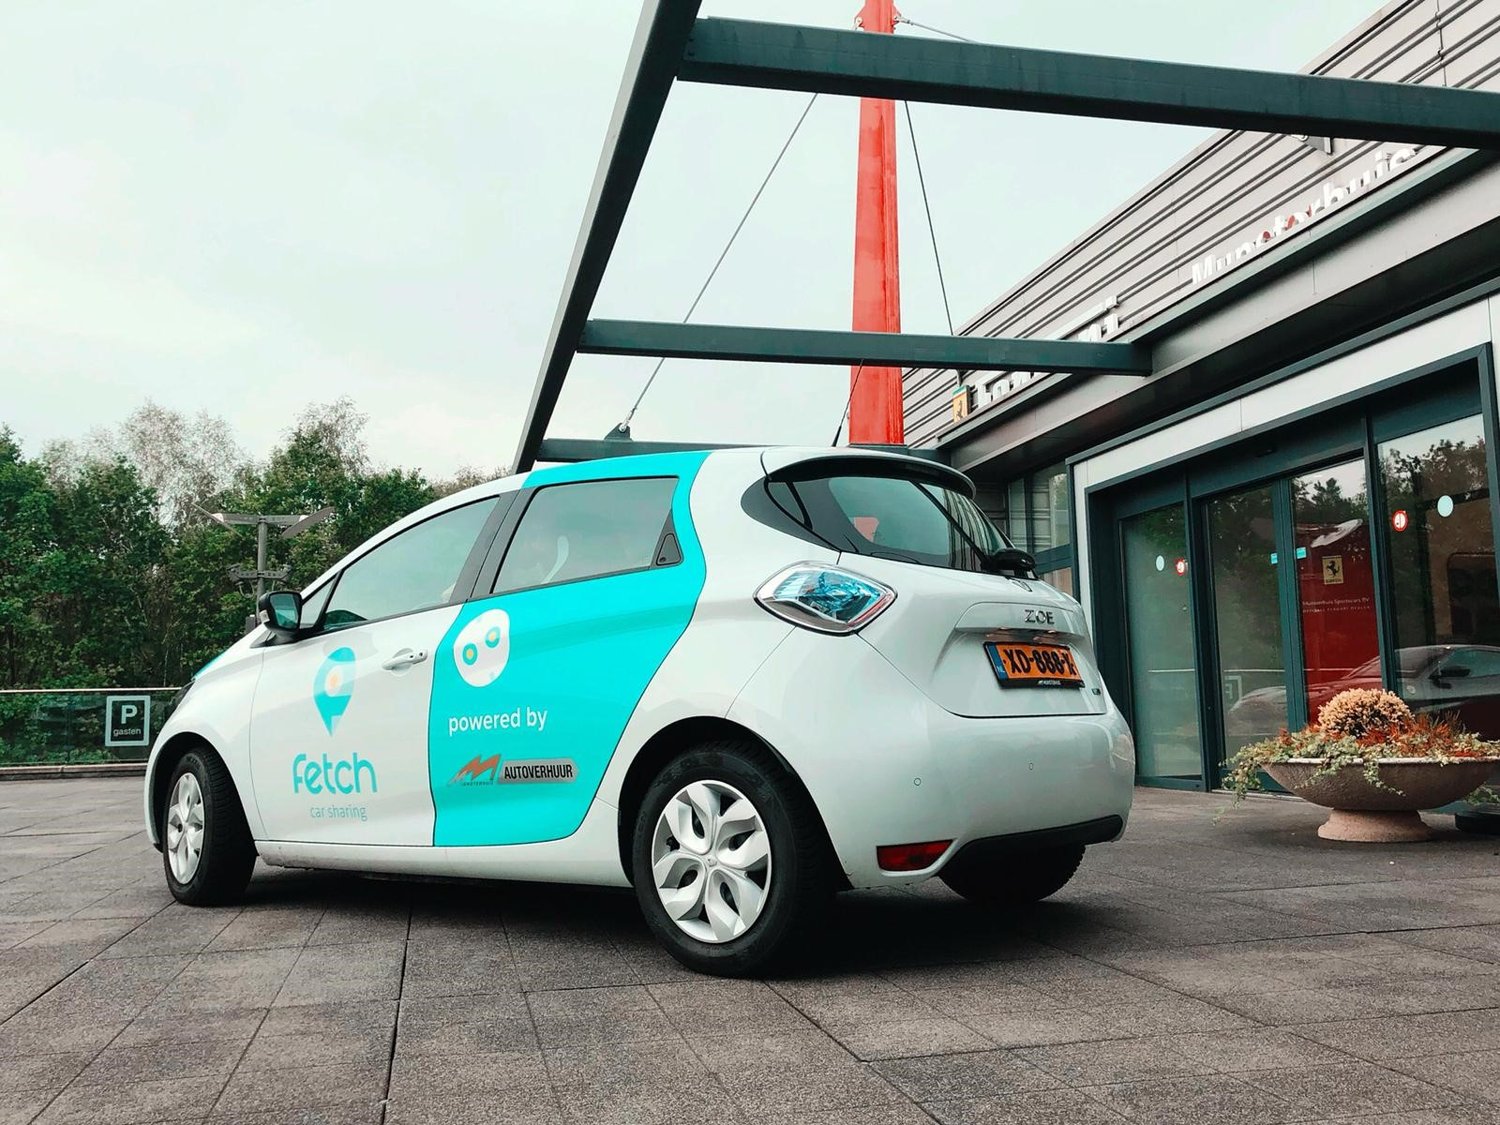 In 2021 electric rental cars for business travel